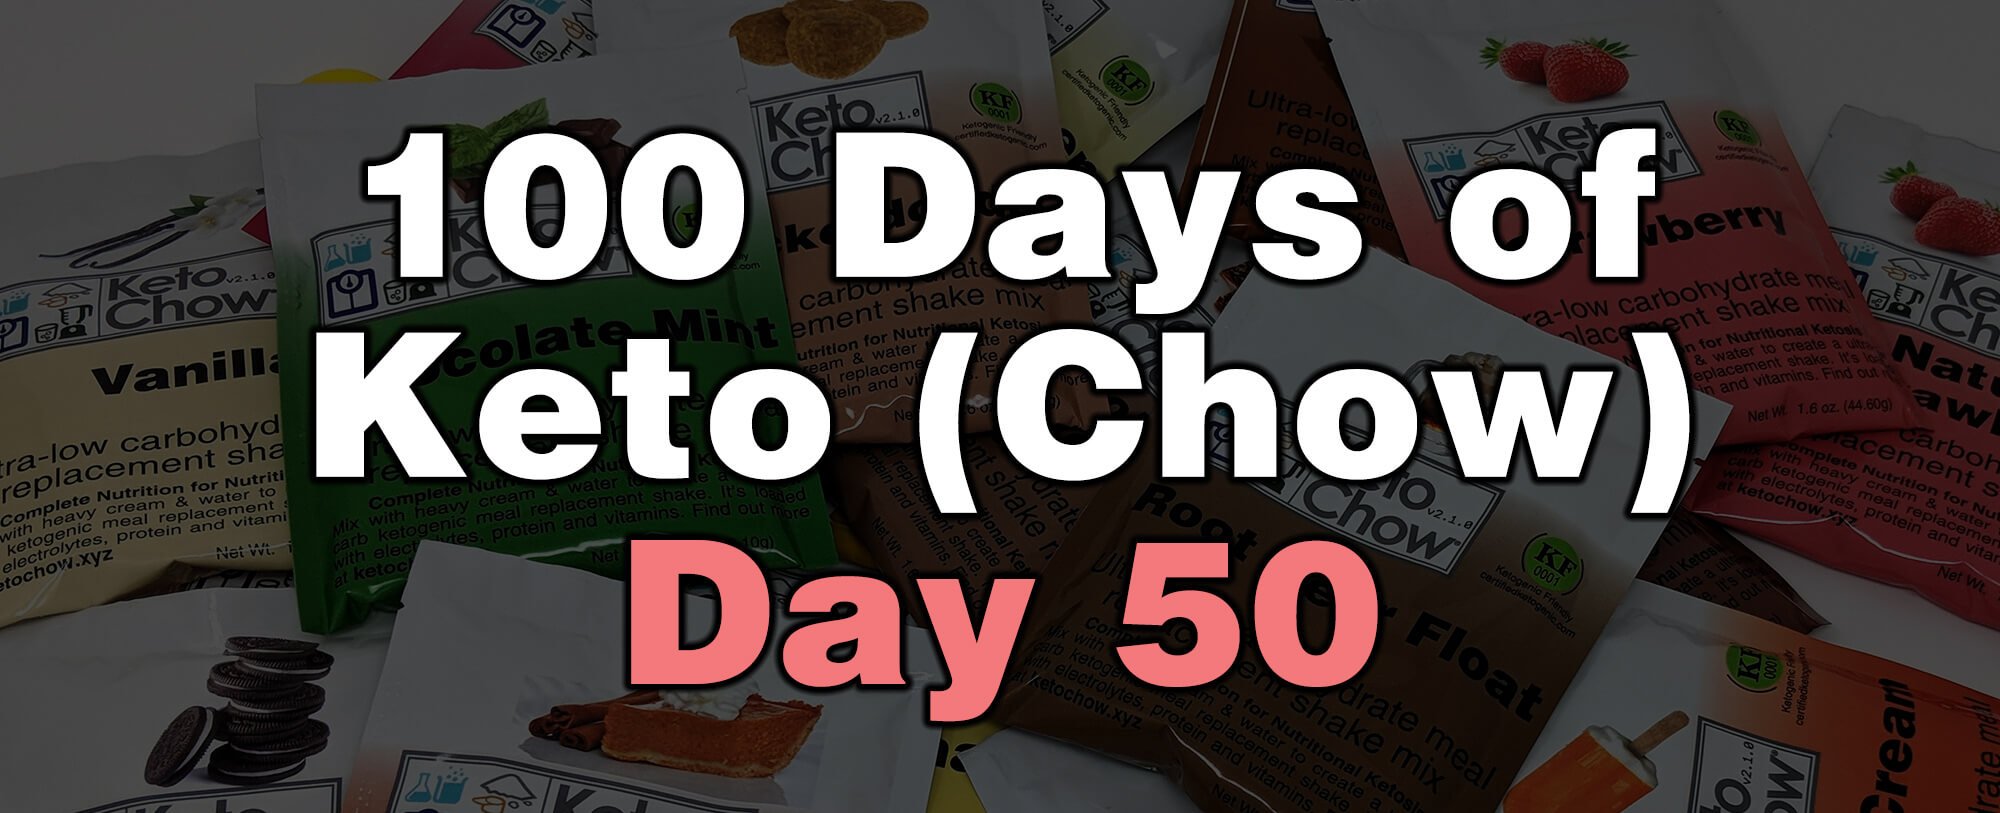 100 days of keto chow day 50